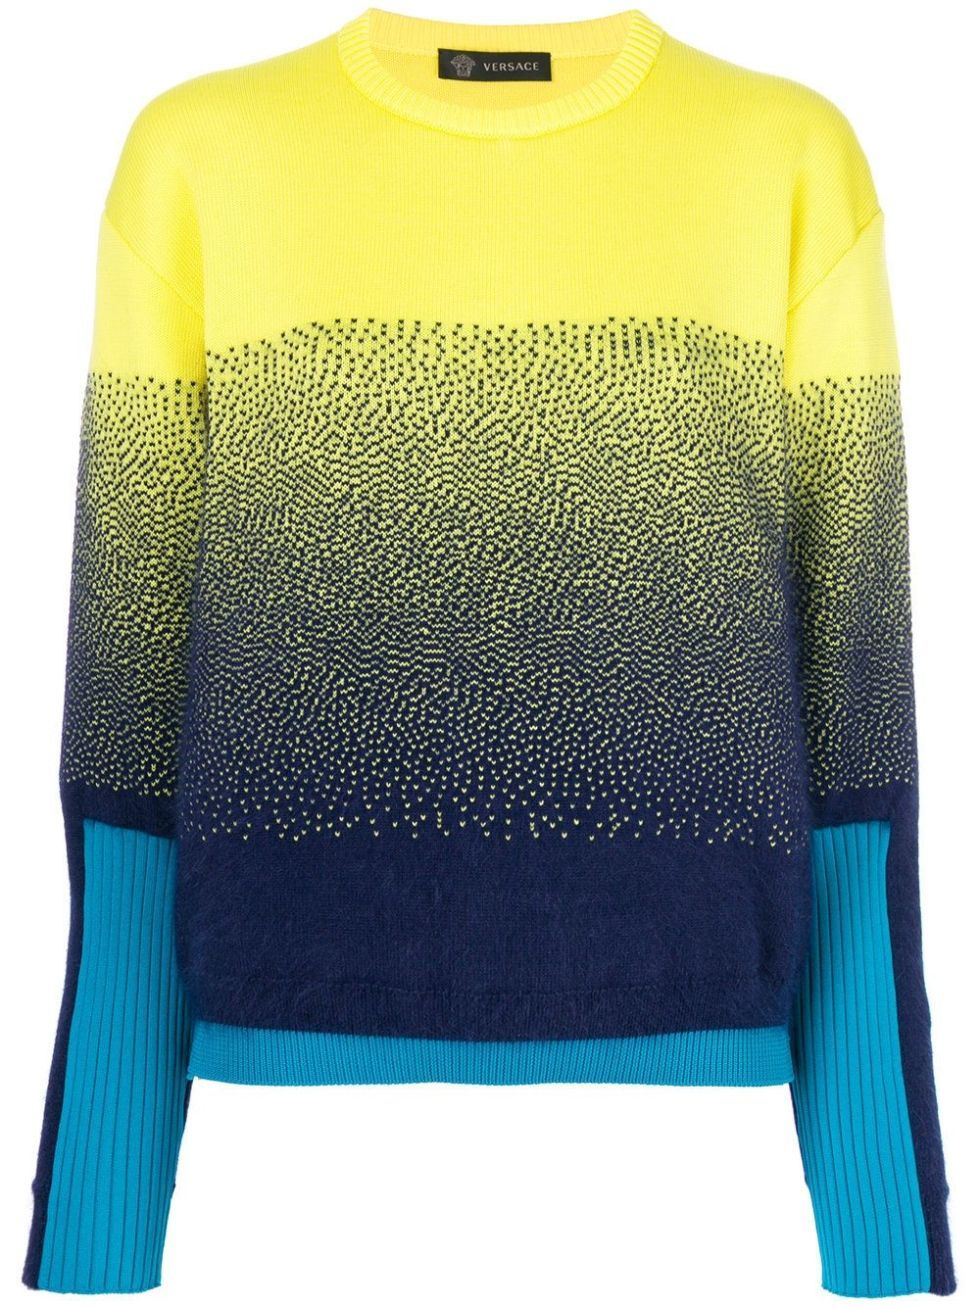 Clothing, Green, Yellow, Blue, Sleeve, Turquoise, Sweater, Outerwear, Jersey, Neck, 